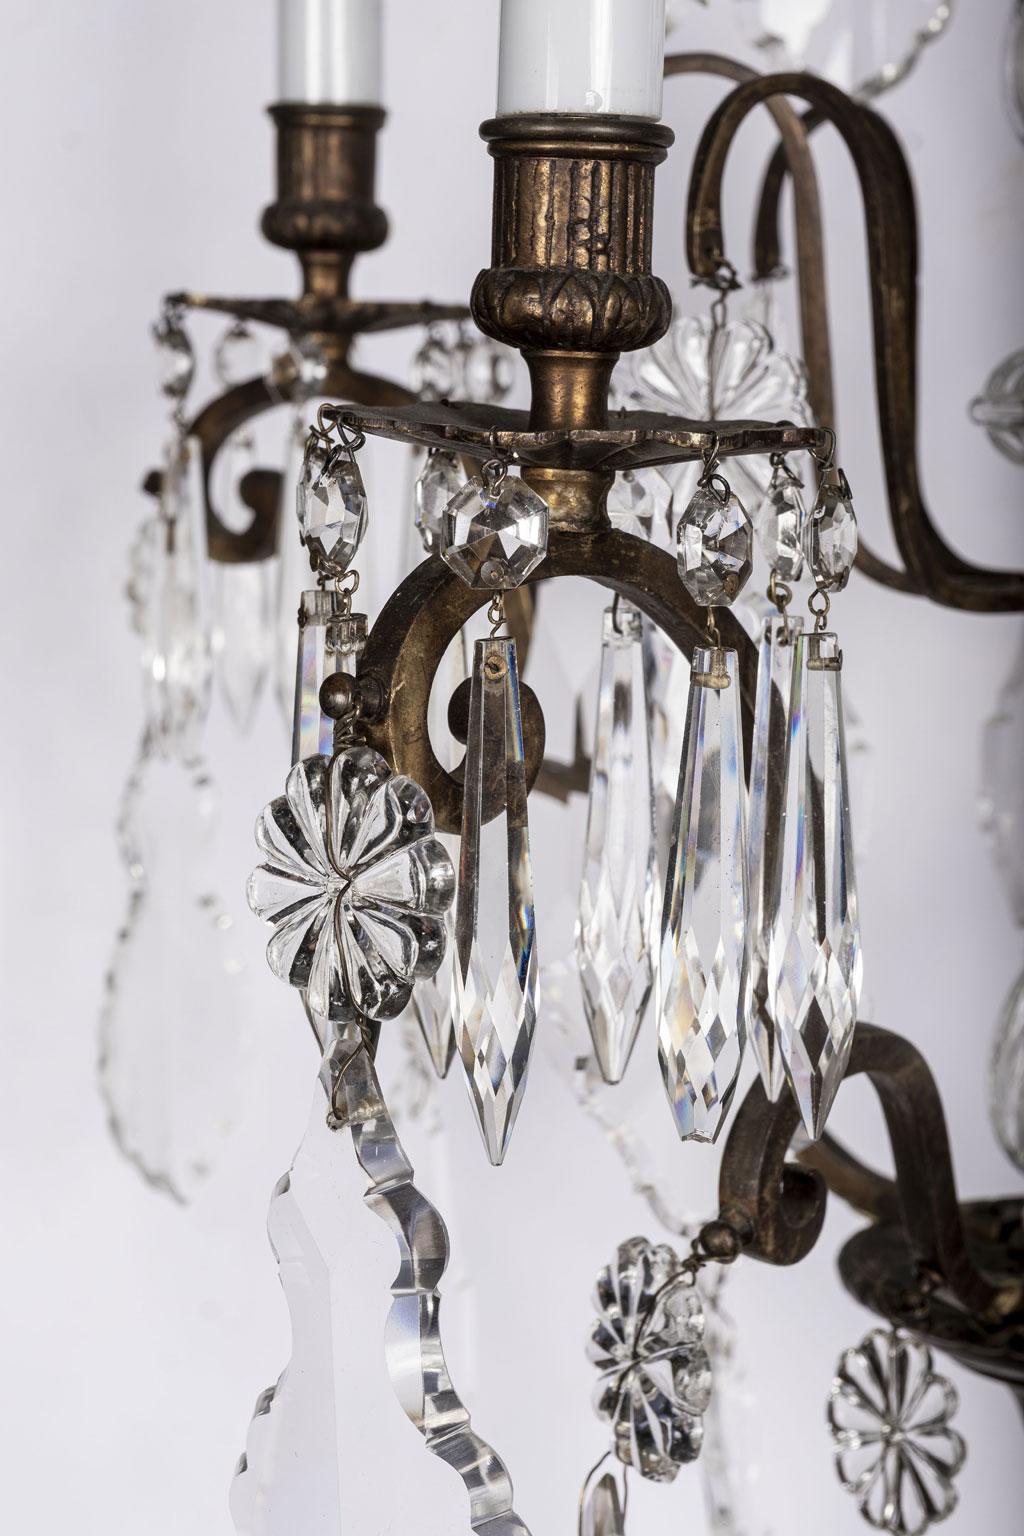 19th century crystal chandelier: Gilt brass frame adorned with high quality original crystal prisms attributed to Baccarat. Newly wired using all UL listed parts for use within the USA. Includes chain and canopy (listed height does not include